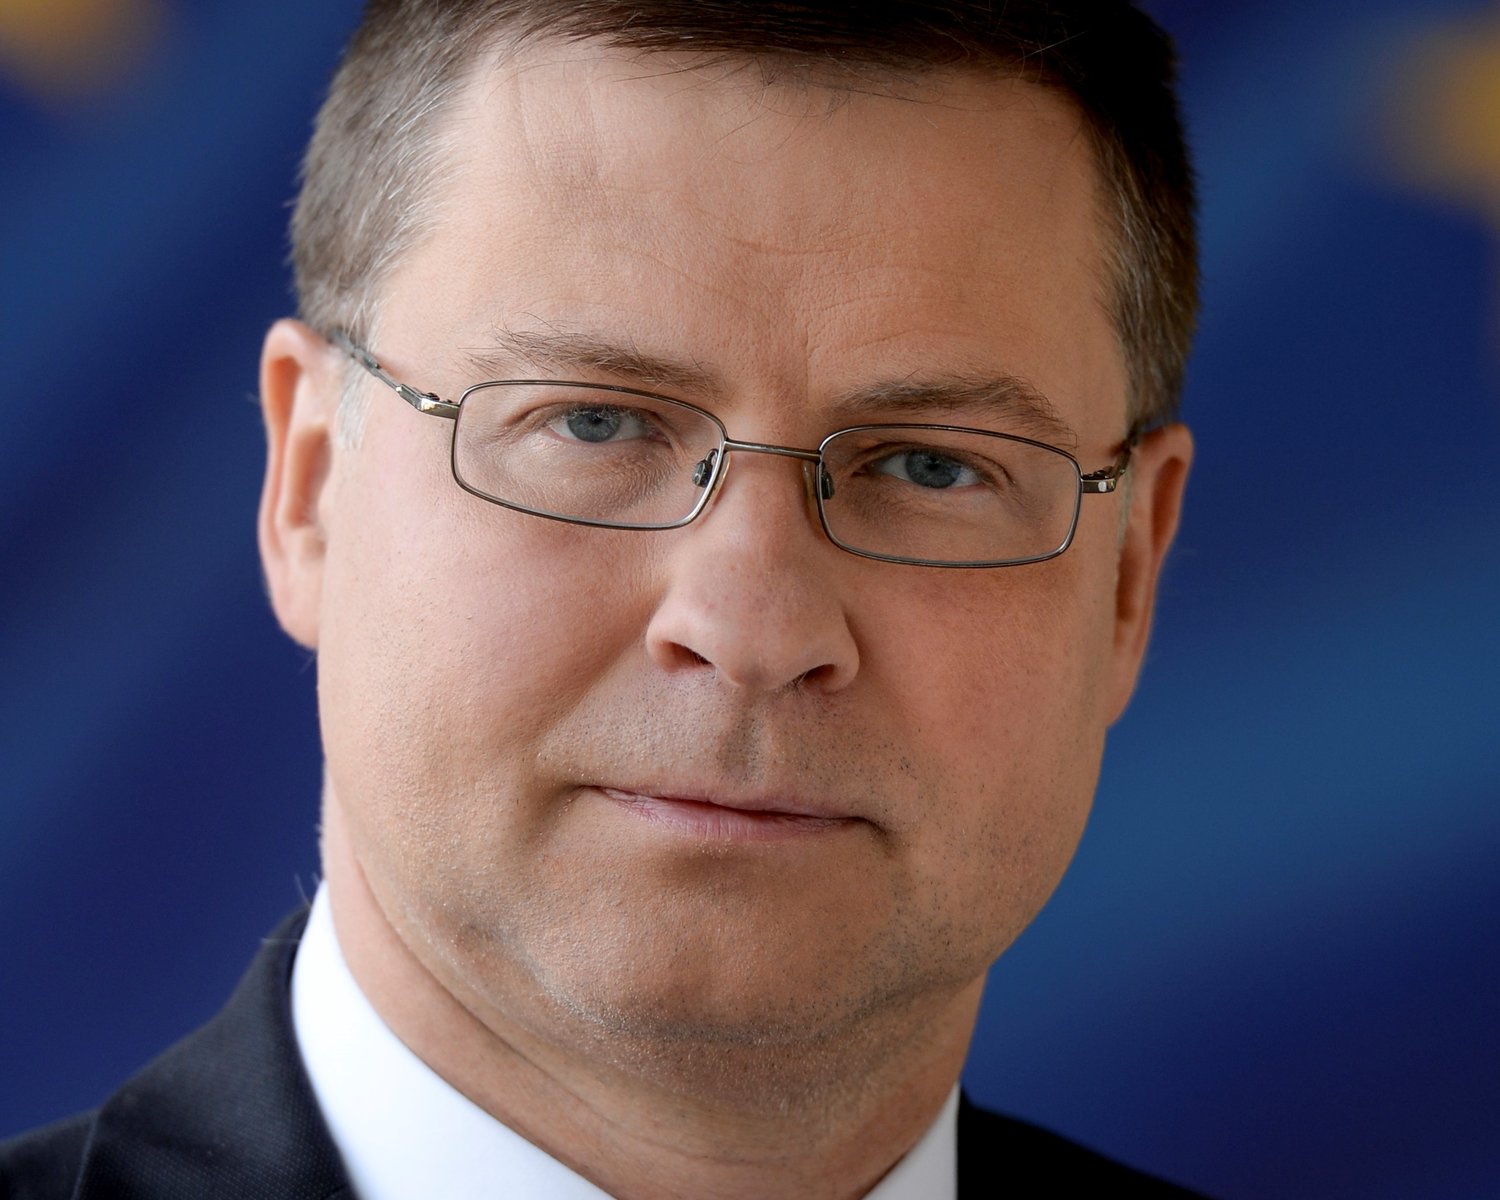 Valdis Dombrovski, Vice-President of the EC in charge of the Euro and Social Dialogue